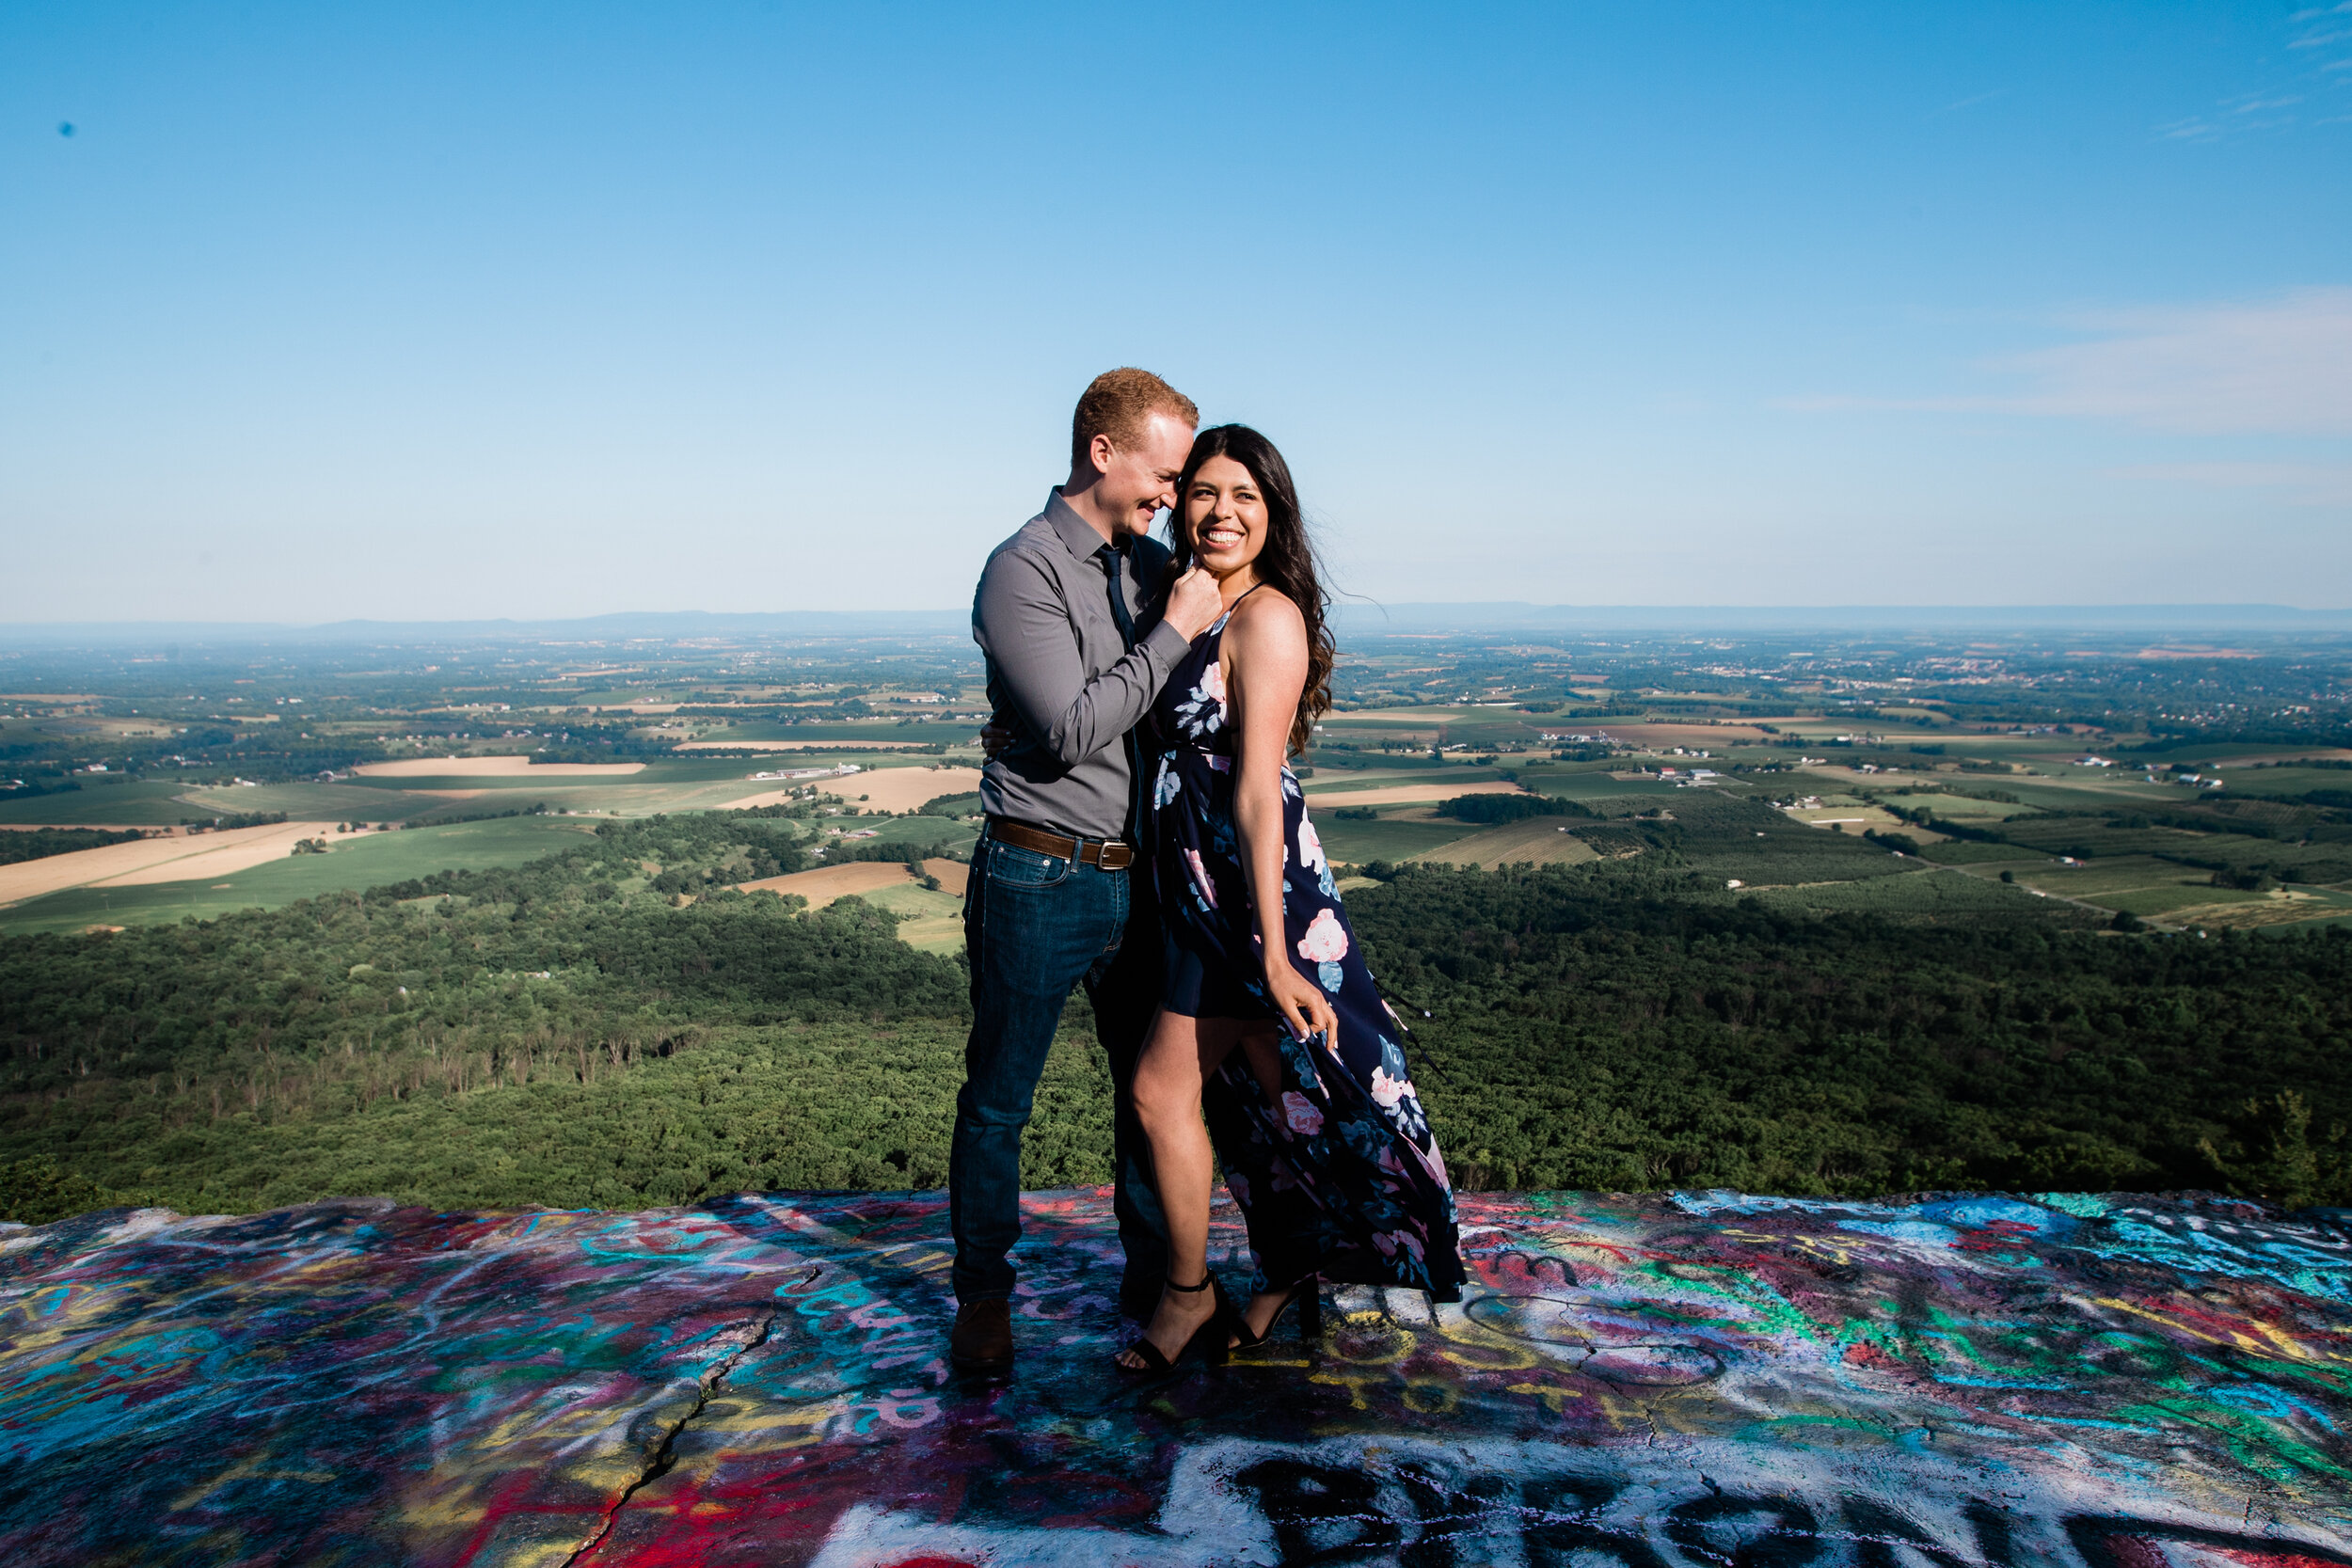 Engagement Session at High Rock Mountain in Western Maryland by Megapixels Media Photography best husband and wife wedding photographers-5.jpg